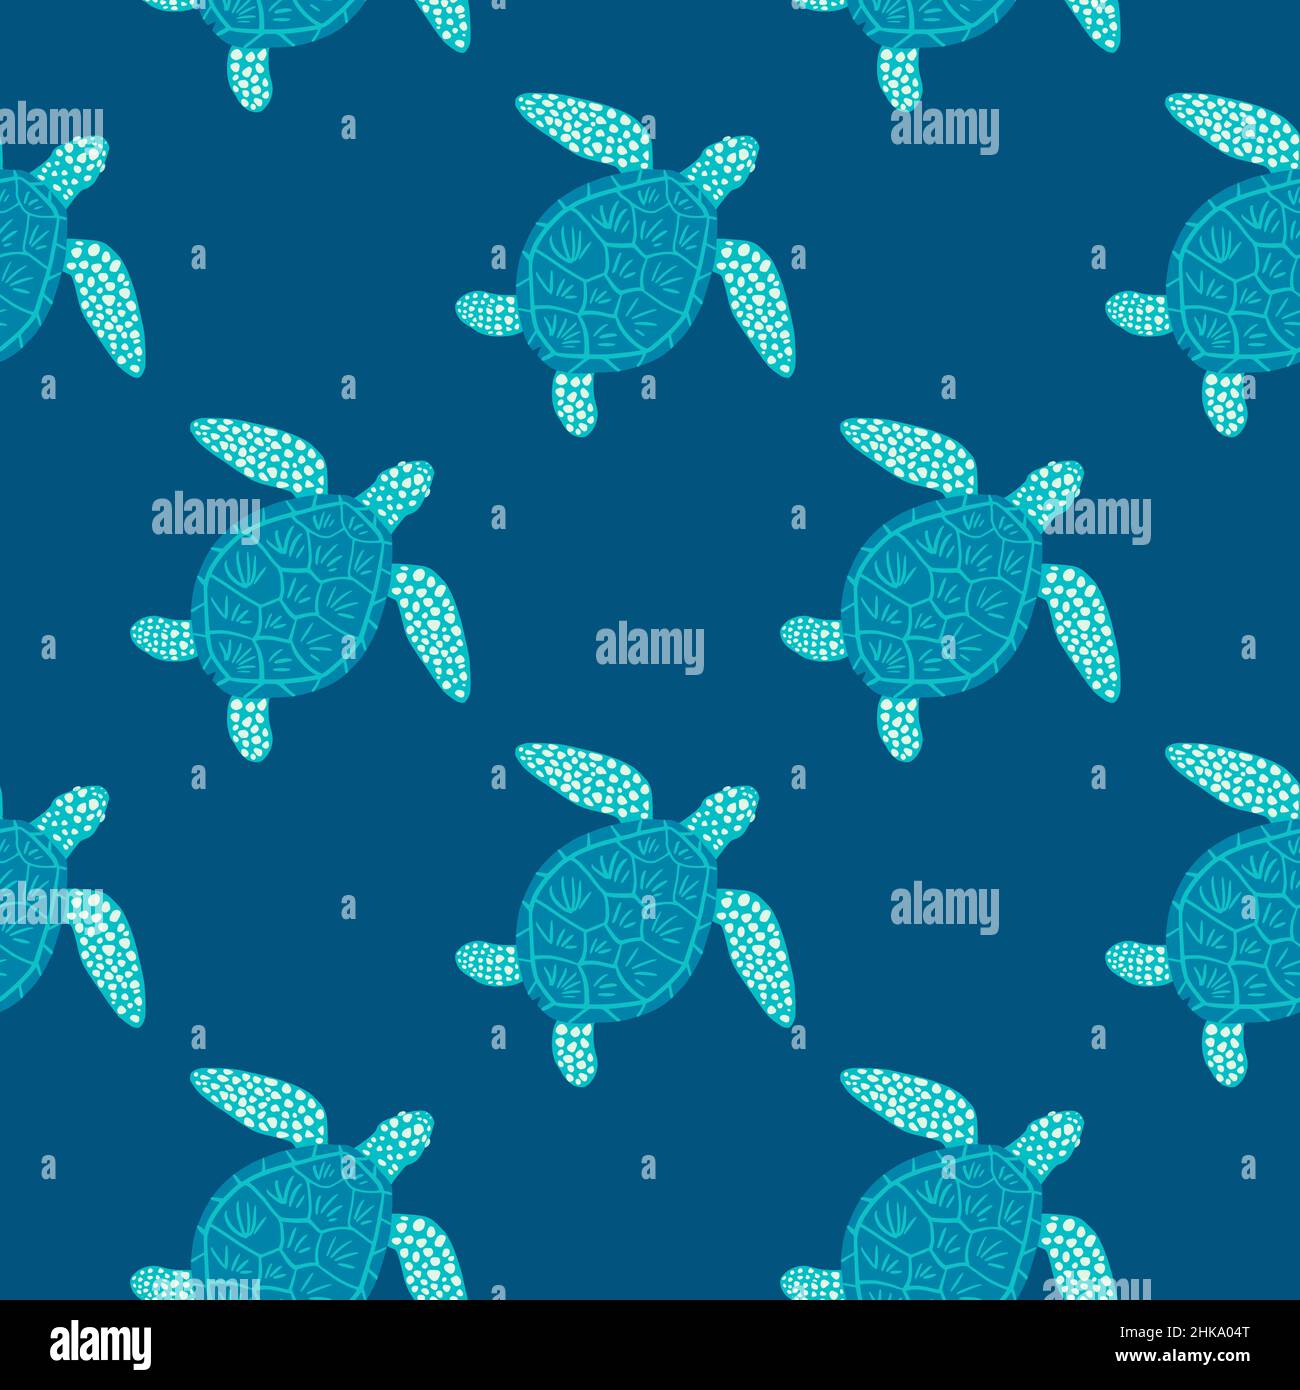 Turtle On - Blue - Wrapping Paper